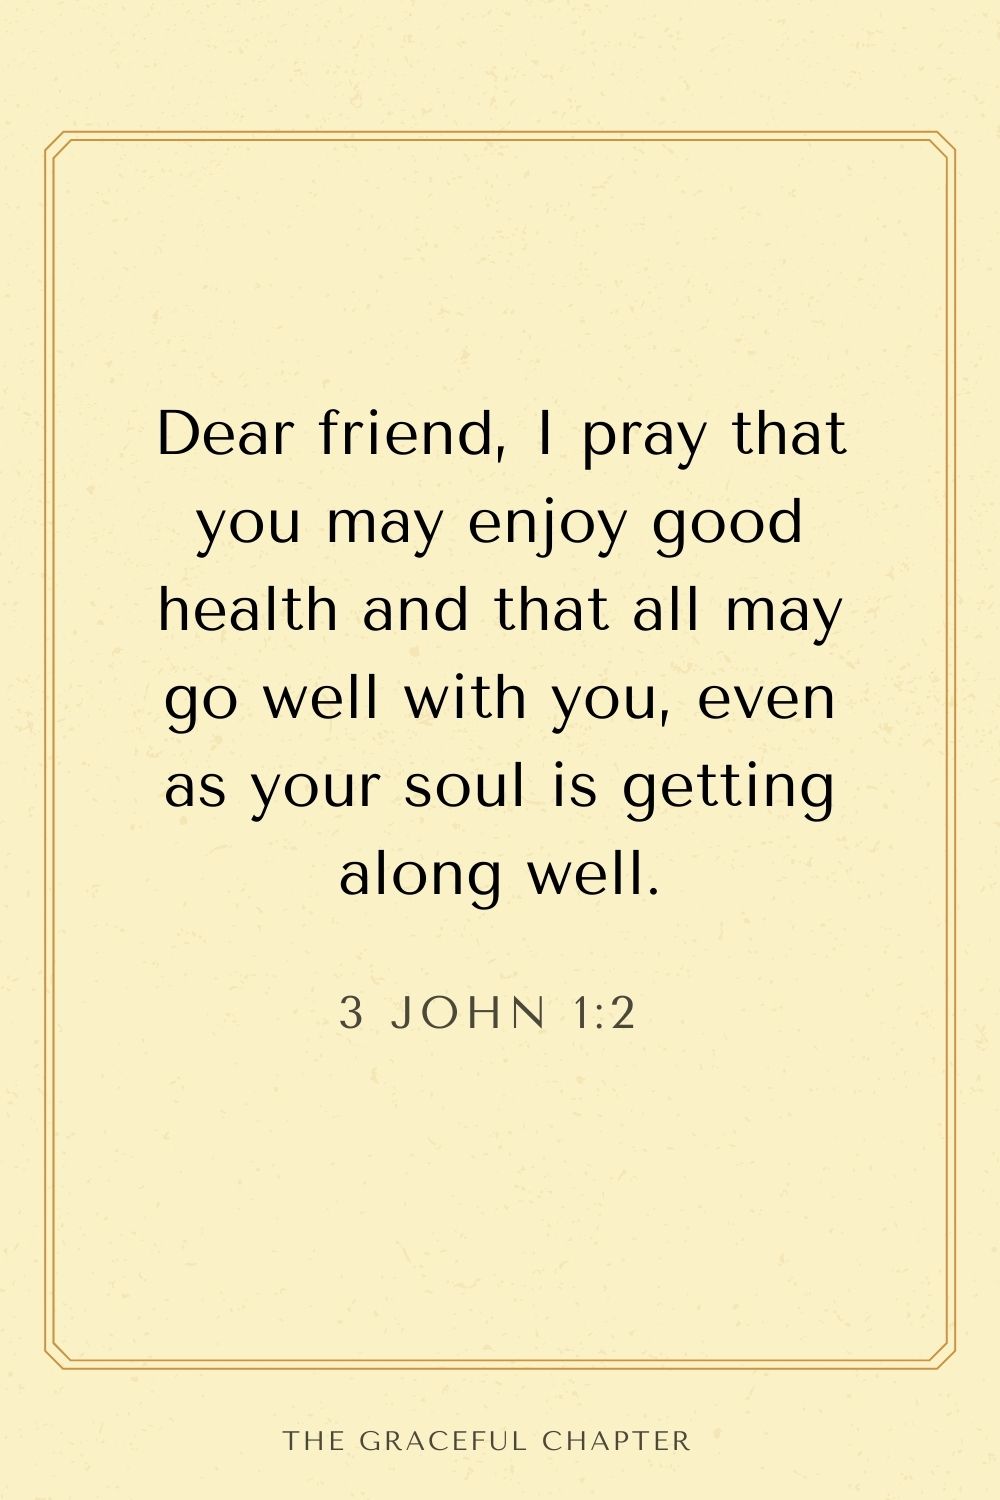 Dear friend, I pray that you may enjoy good health and that all may go well with you, even as your soul is getting along well. 3 John 1:2